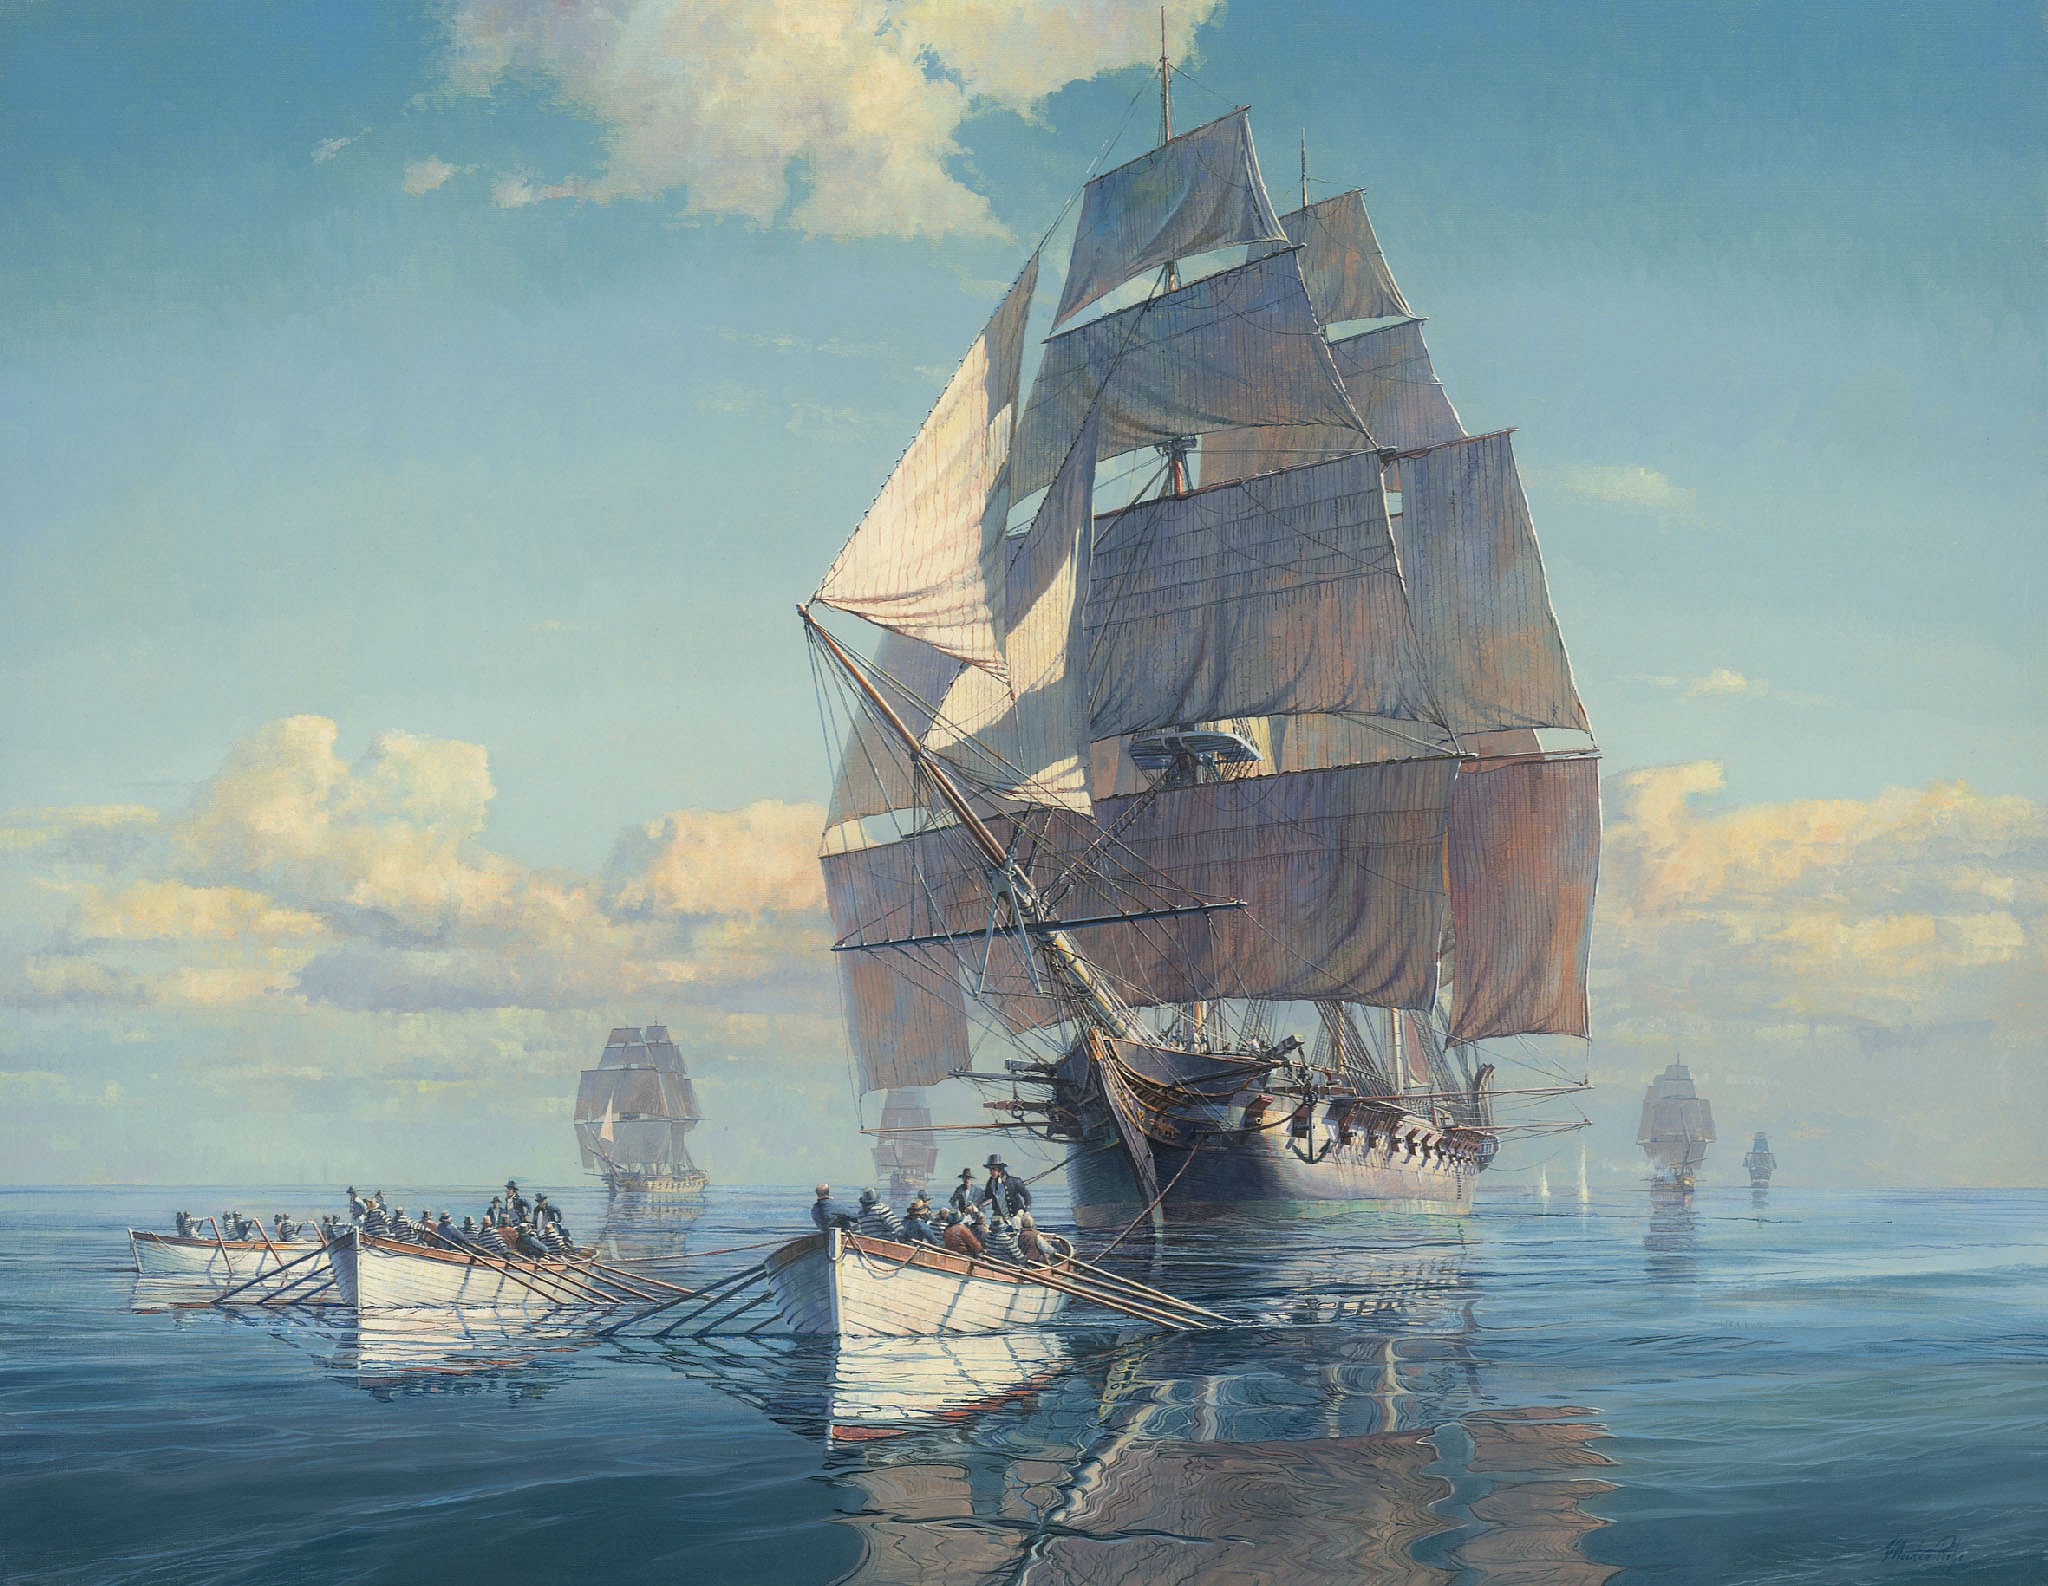 PRESS RELEASE: Maarten Platje: The Early History of the U.S. Navy, Apr  8 - Aug 30, 2019